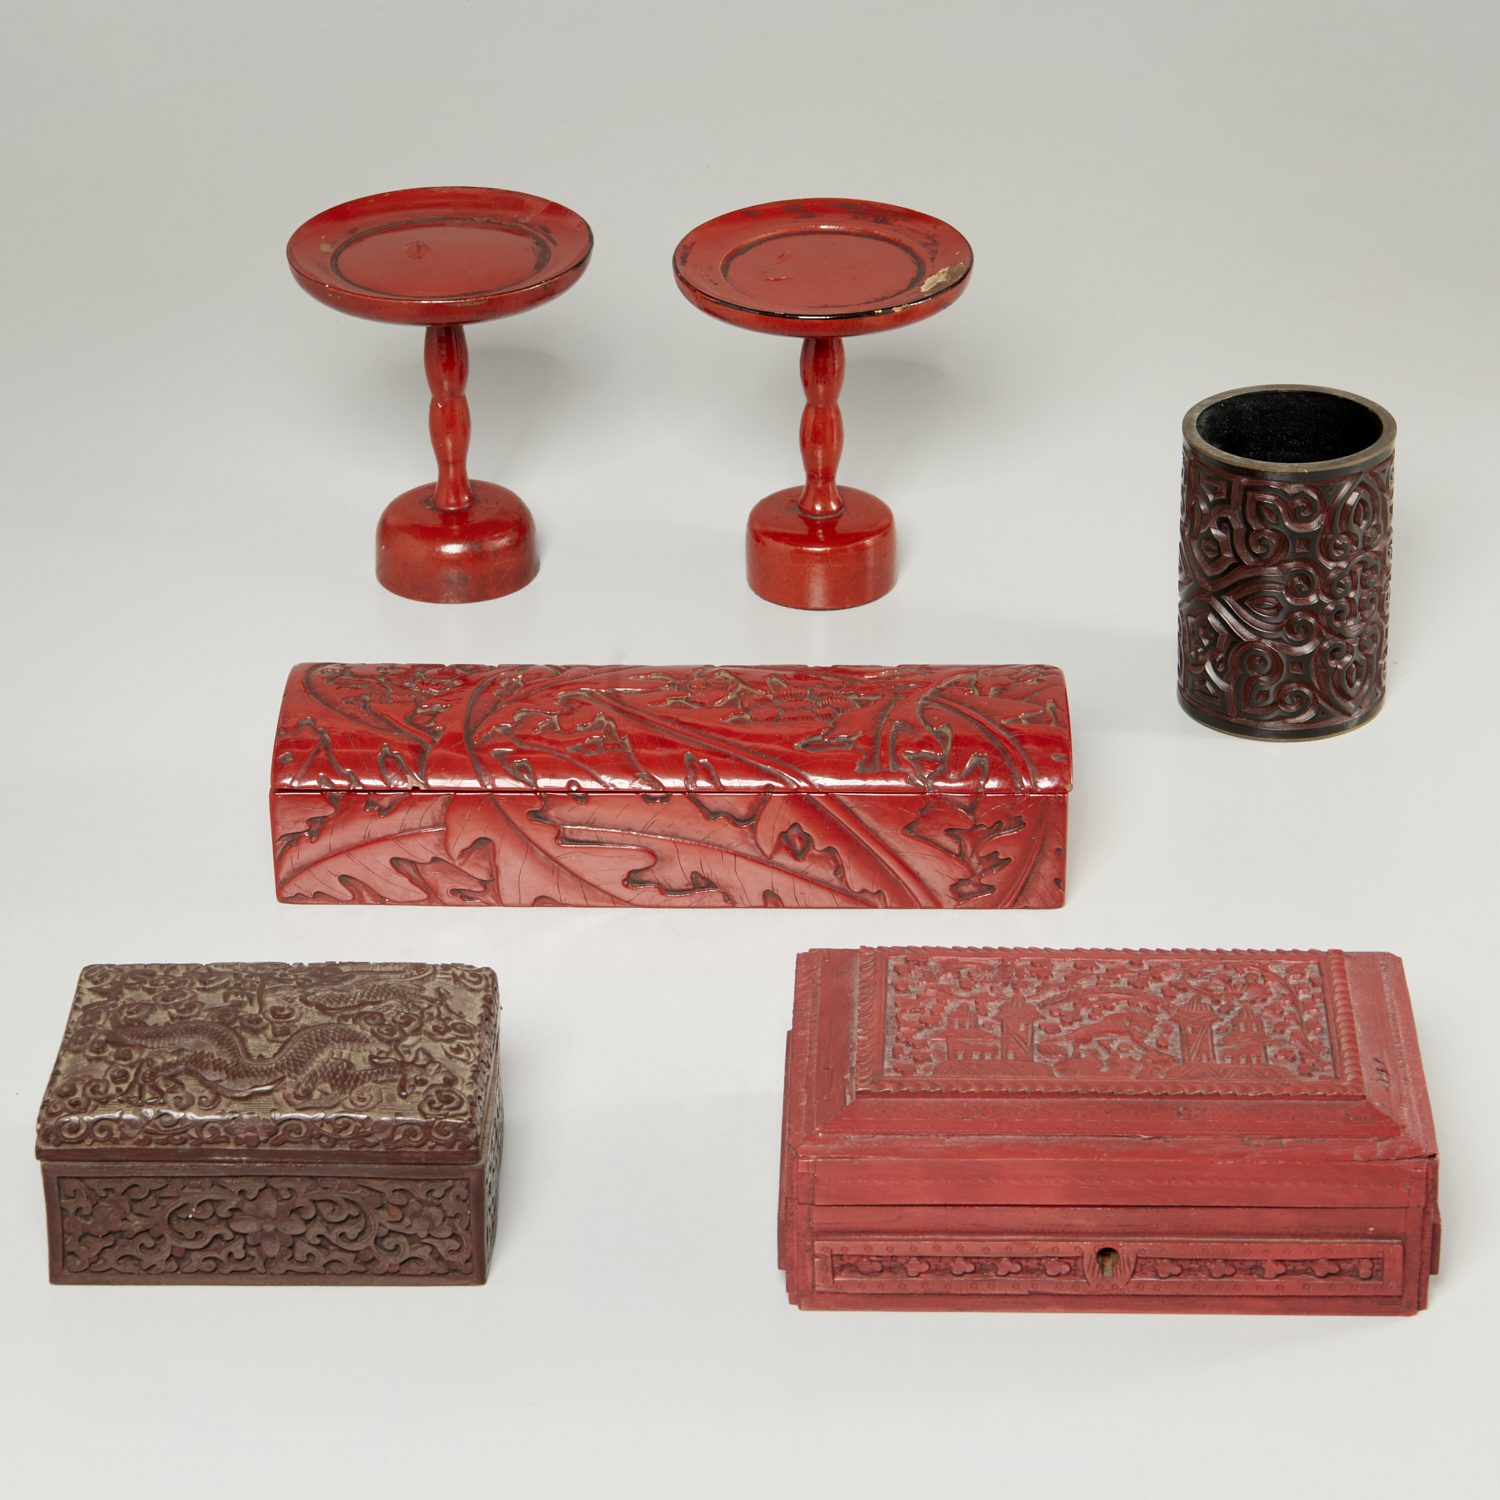  6 CHINESE AND JAPANESE LACQUERWARE 36115b